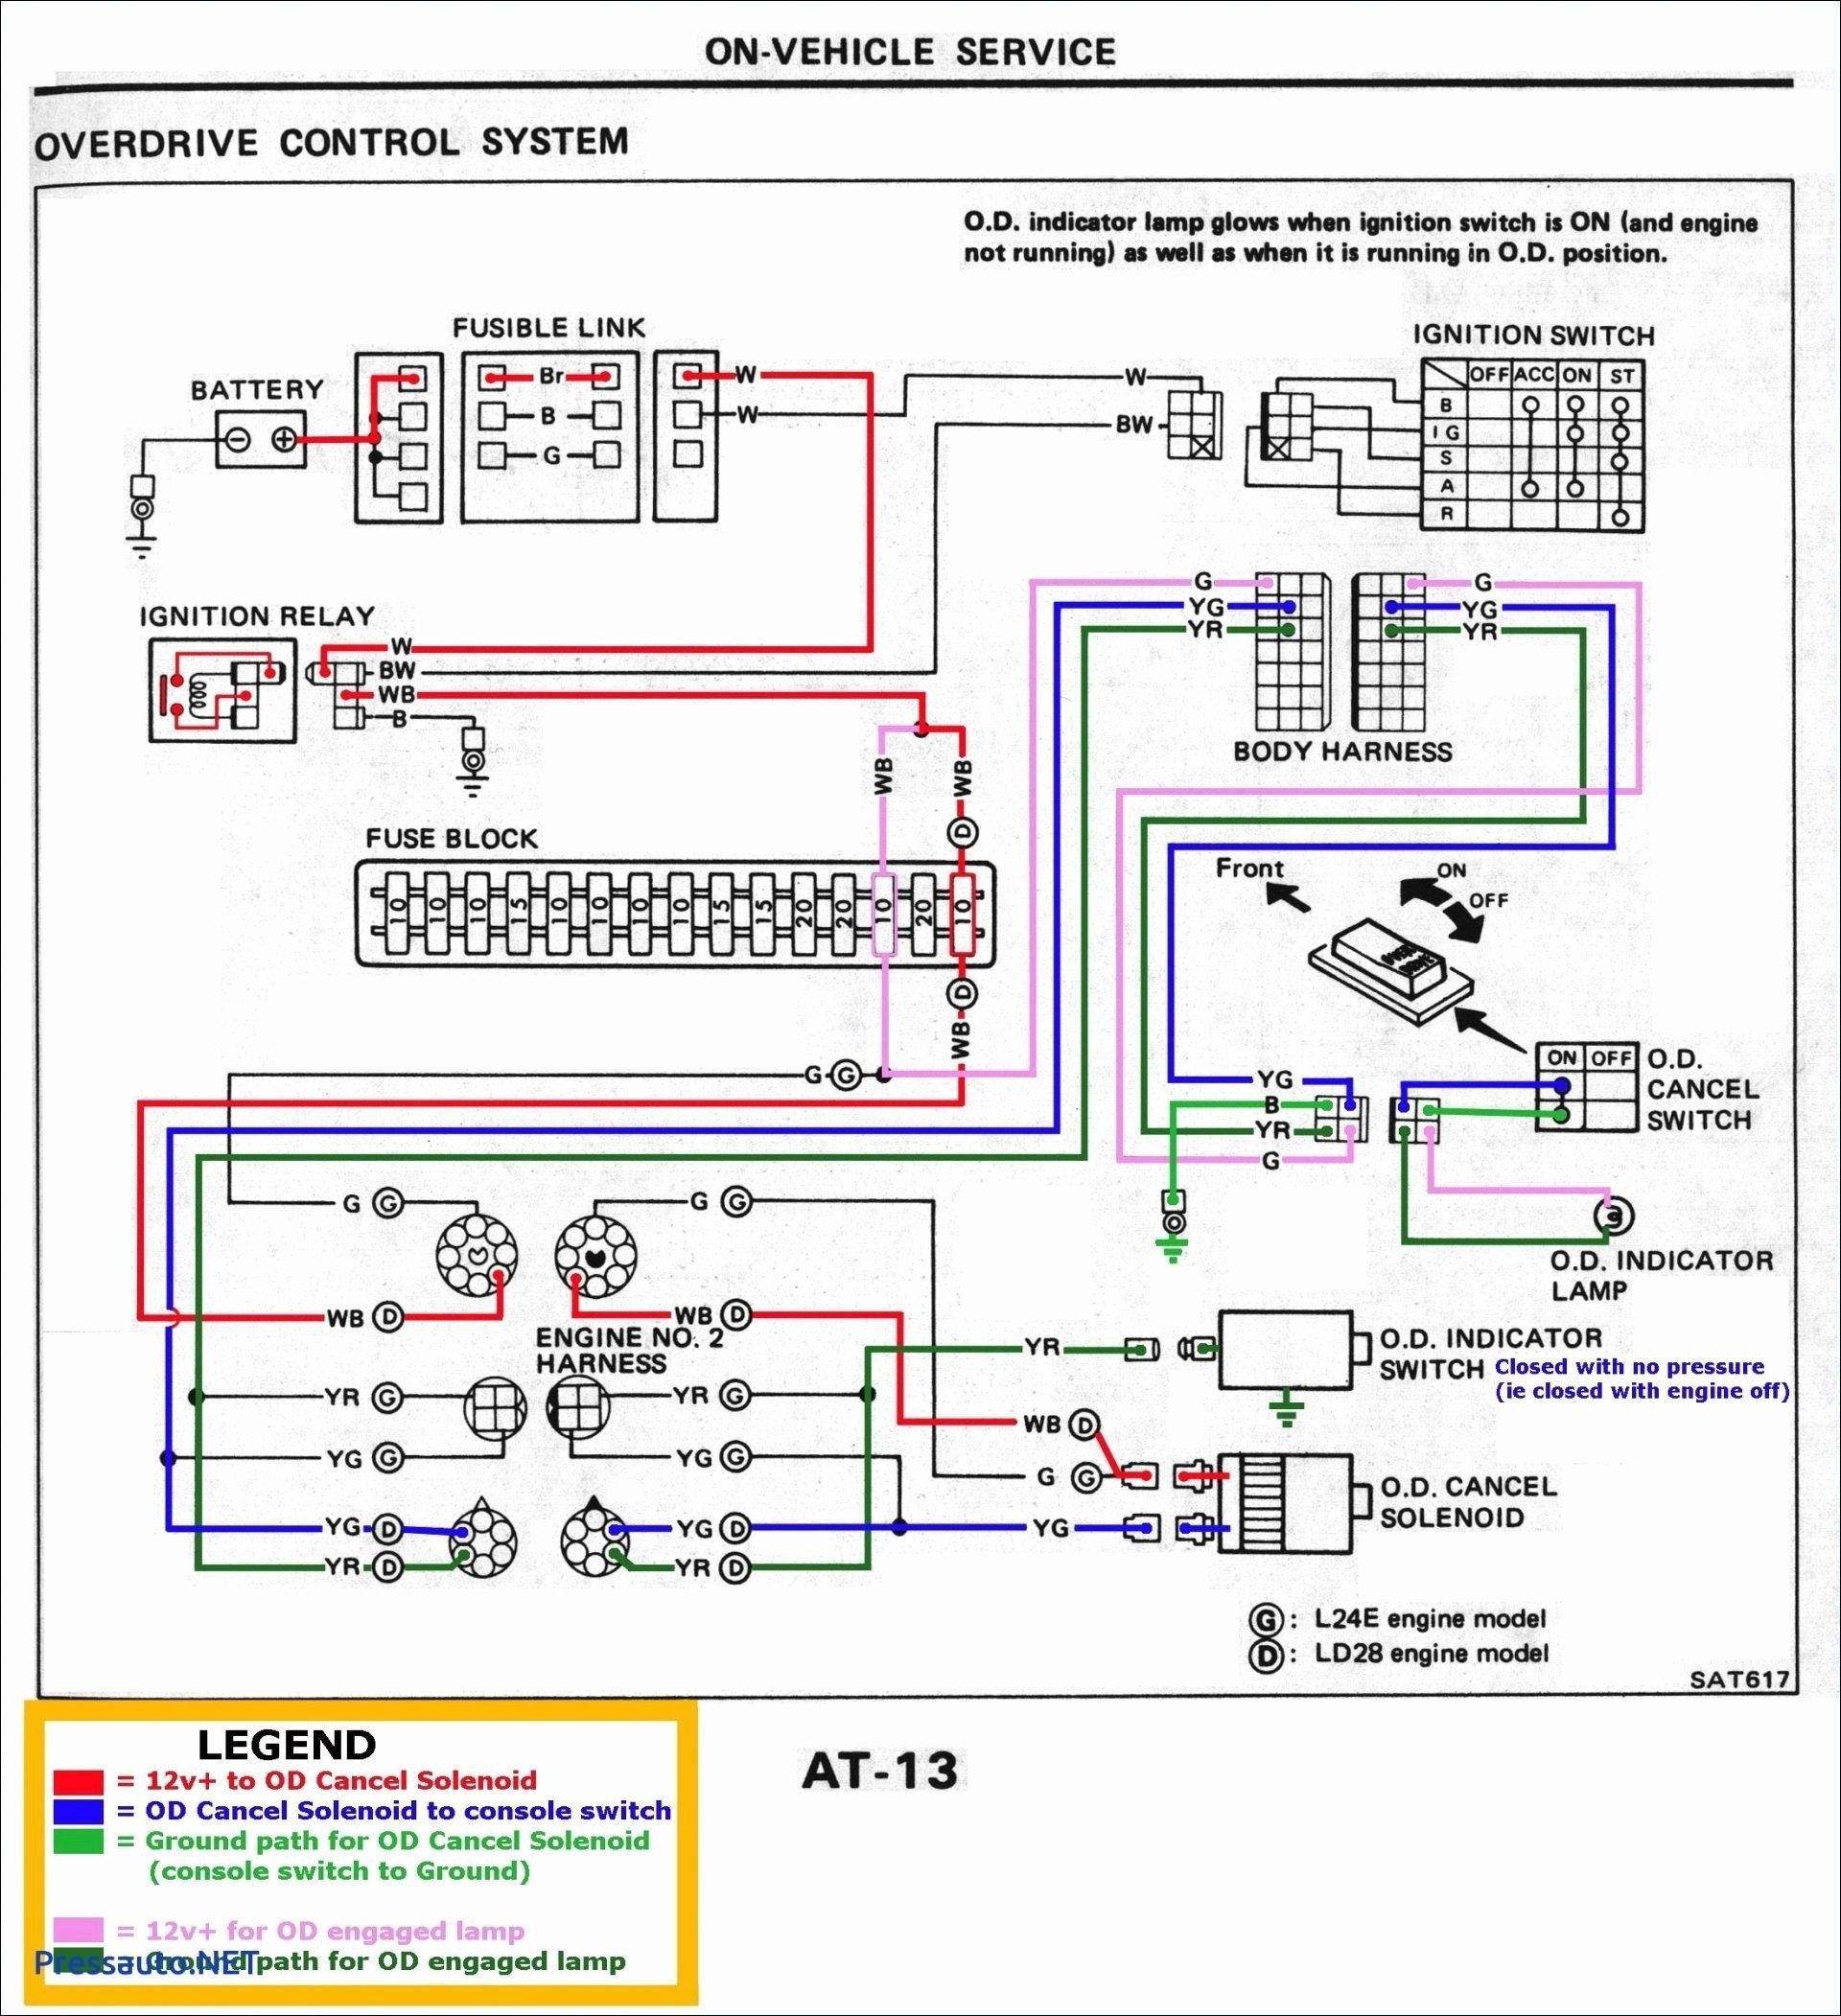 Clothes Dryer Wiring Diagram Wiring Diagram for Ge Dryer Motor Save Hotpoint Dryer Timer Wiring Of Clothes Dryer Wiring Diagram